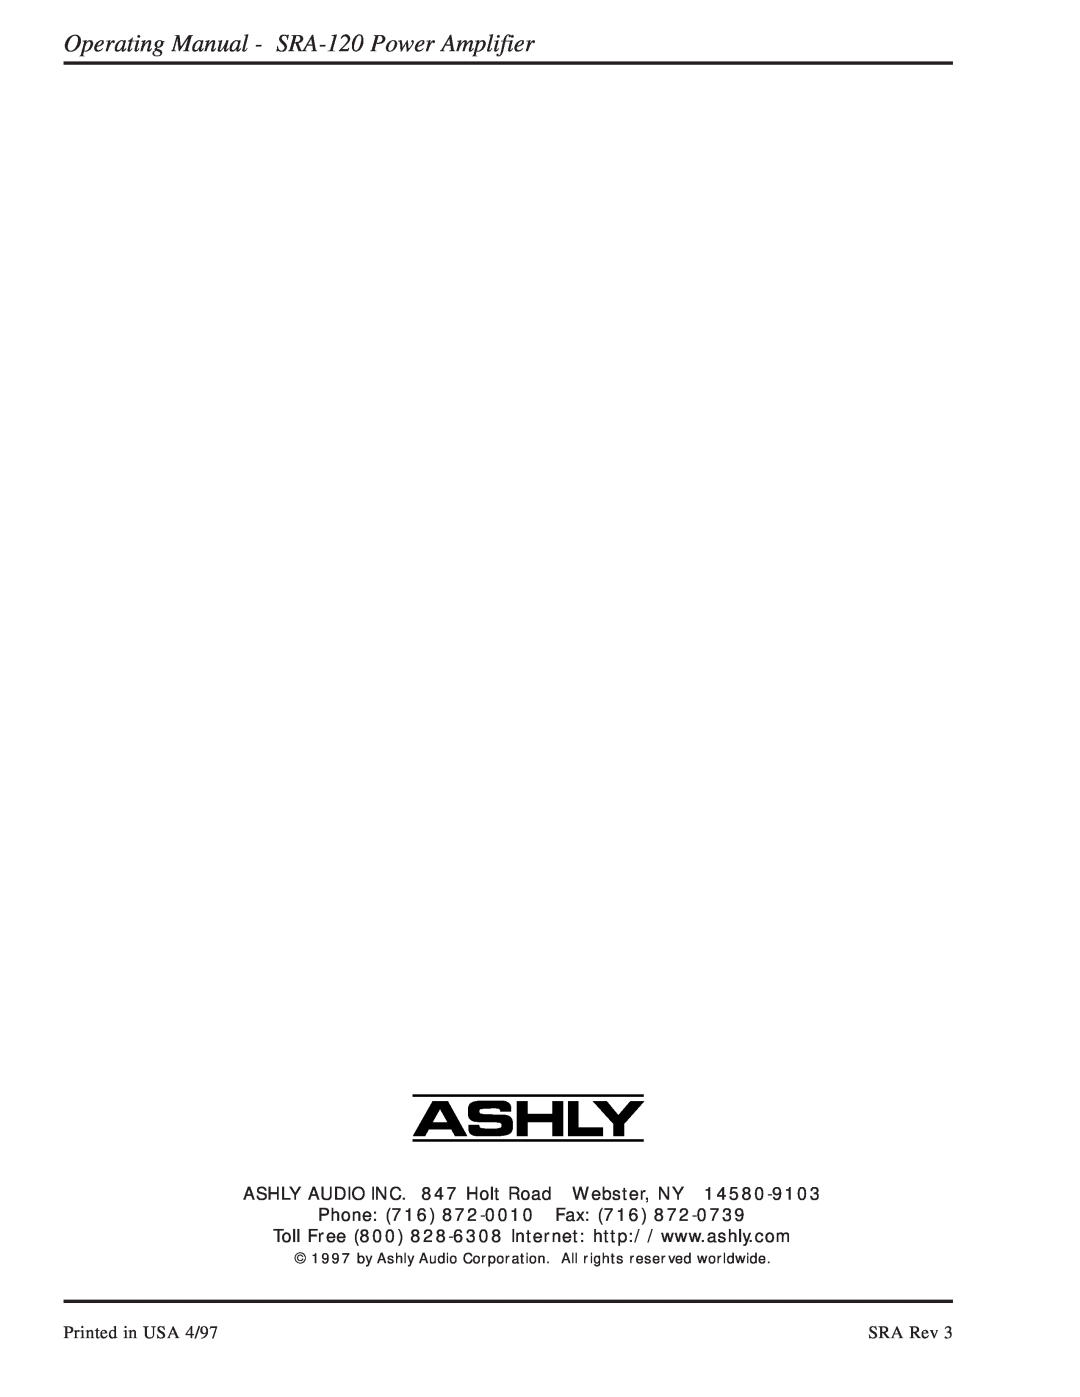 Ashly Operating Manual - SRA-120Power Amplifier, ASHLY AUDIO INC. 847 Holt Road Webster, NY, Phone 716 872-0010Fax 